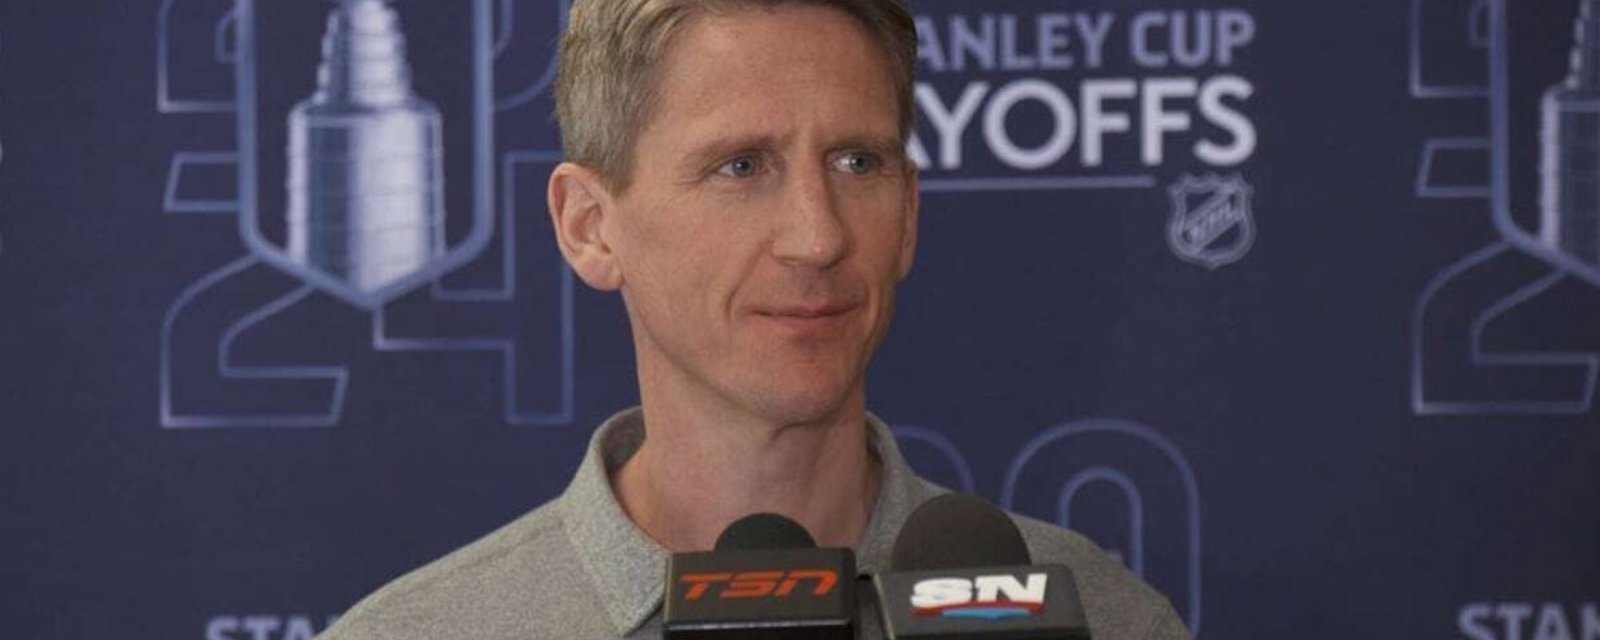 Oilers coach Kris Knoblauch confirms his lineup for Game 7